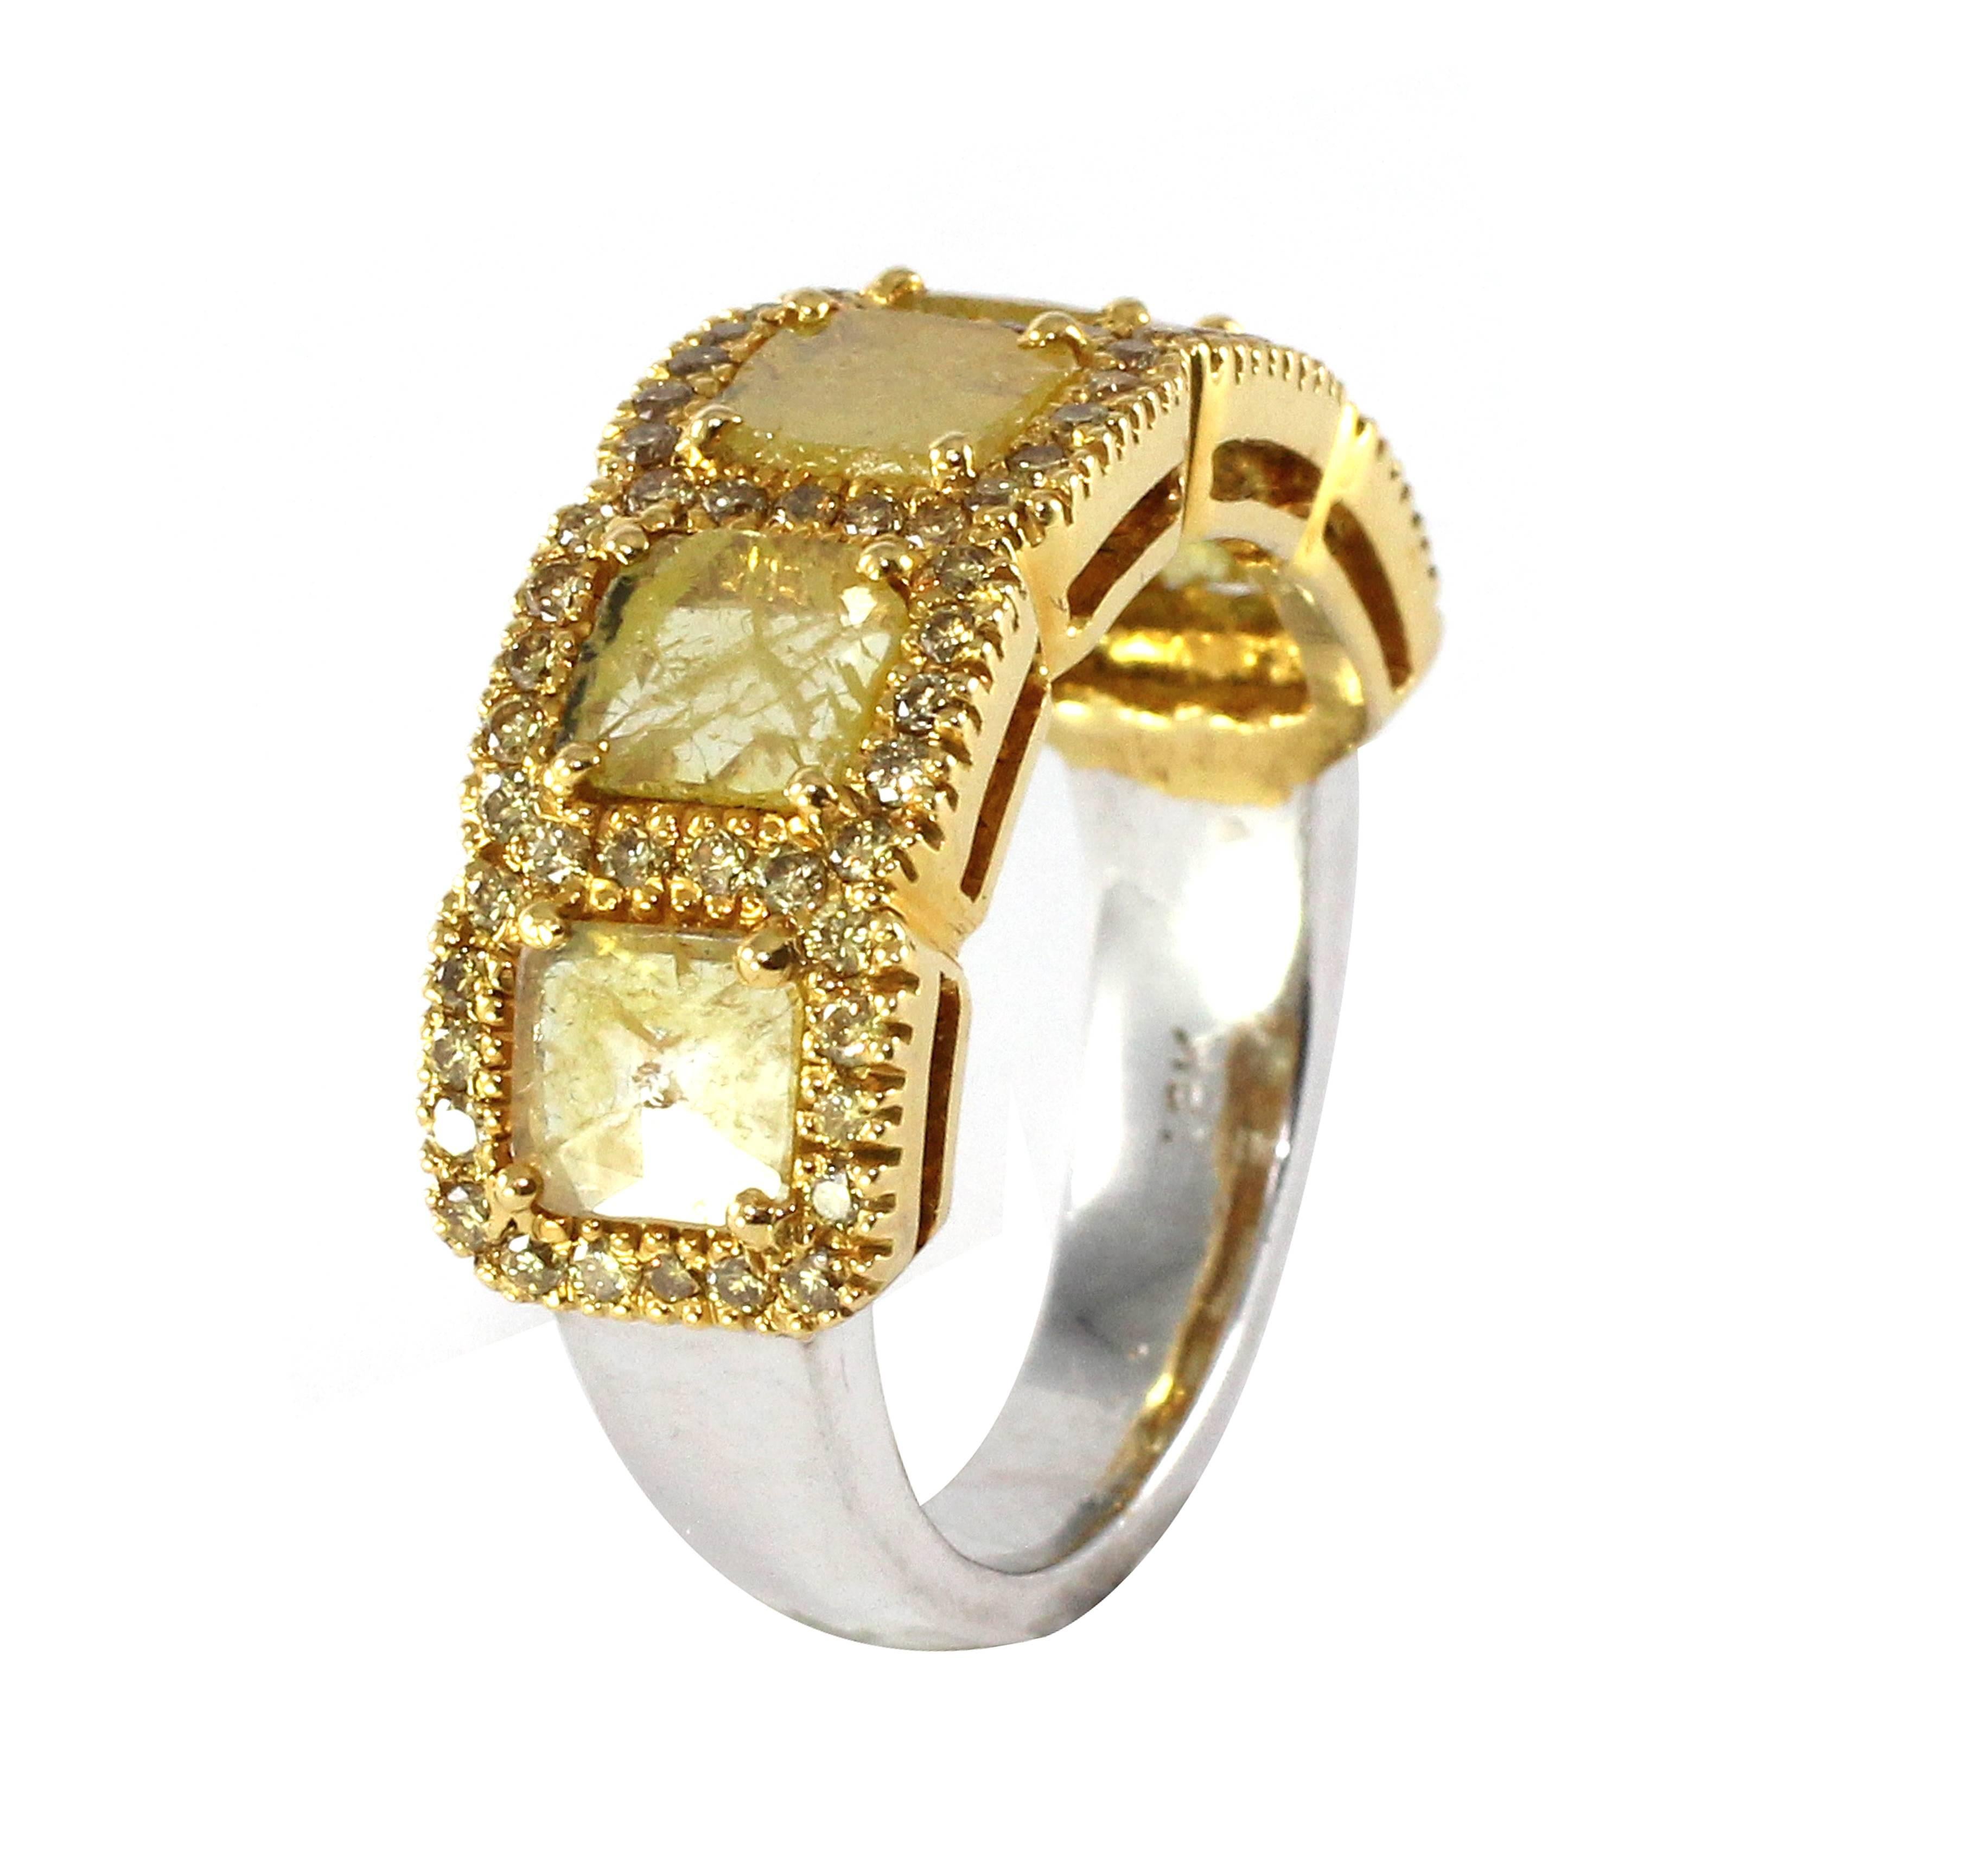 Yellow Slice Diamond Ring surrounded with Natural Yellow Diamonds with 1.56cts. of total diamond weight set  in 18k gold